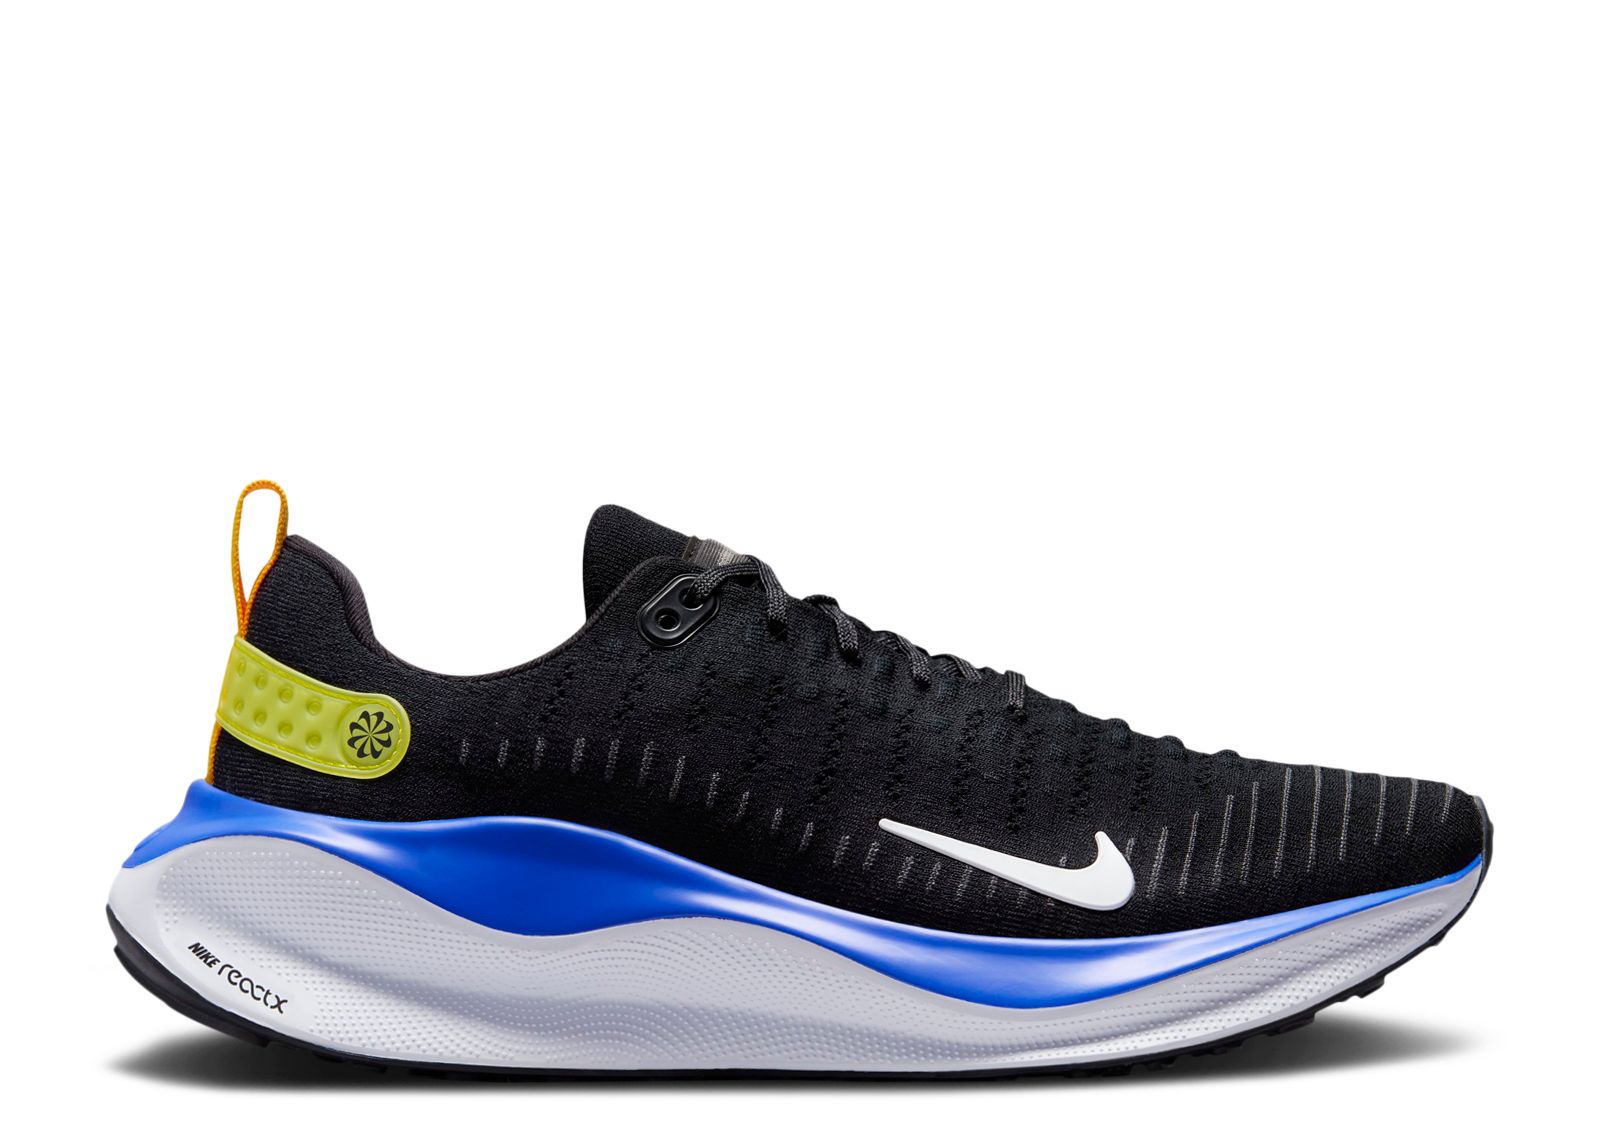 Nike Zapatillas Running Hombre - InfinityRN 4 -  black/white-anthracite-racer blue DR2665-005